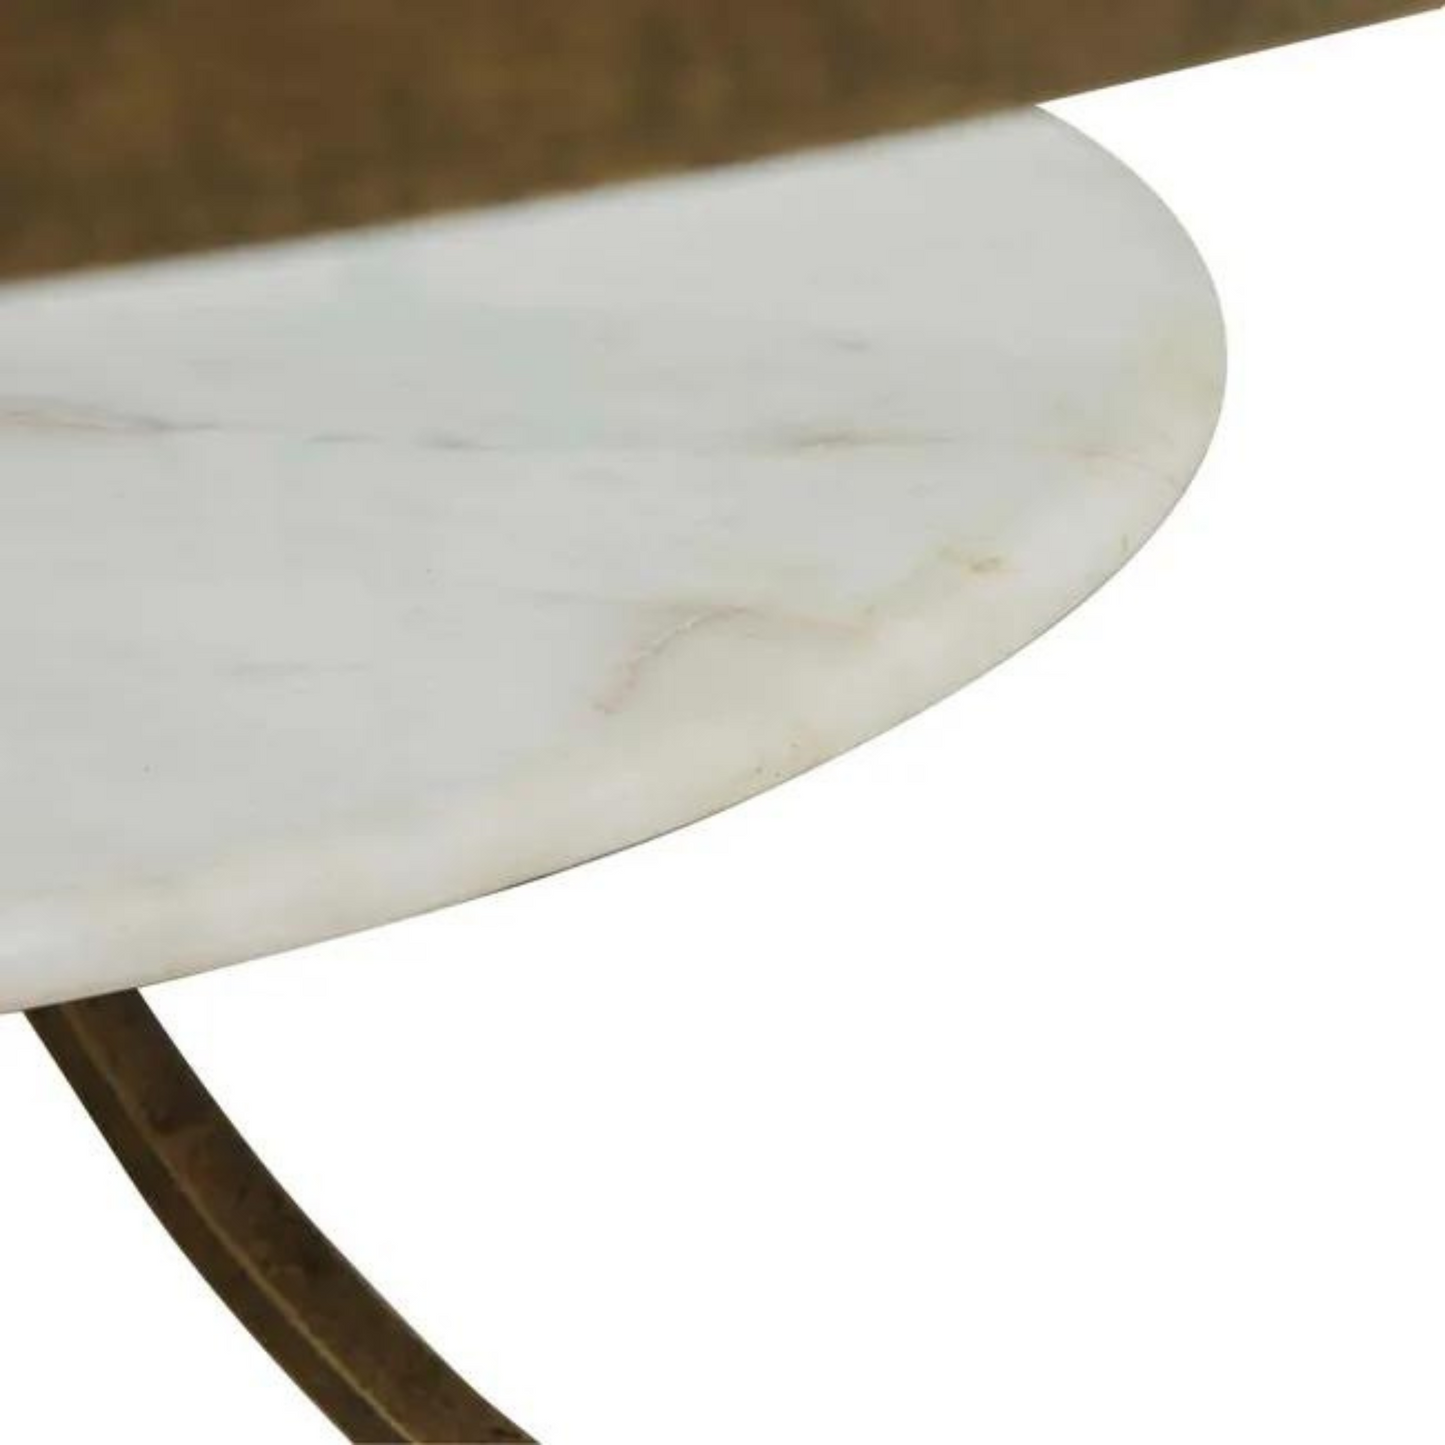 Amelie Curve Coffee Table by Globewest